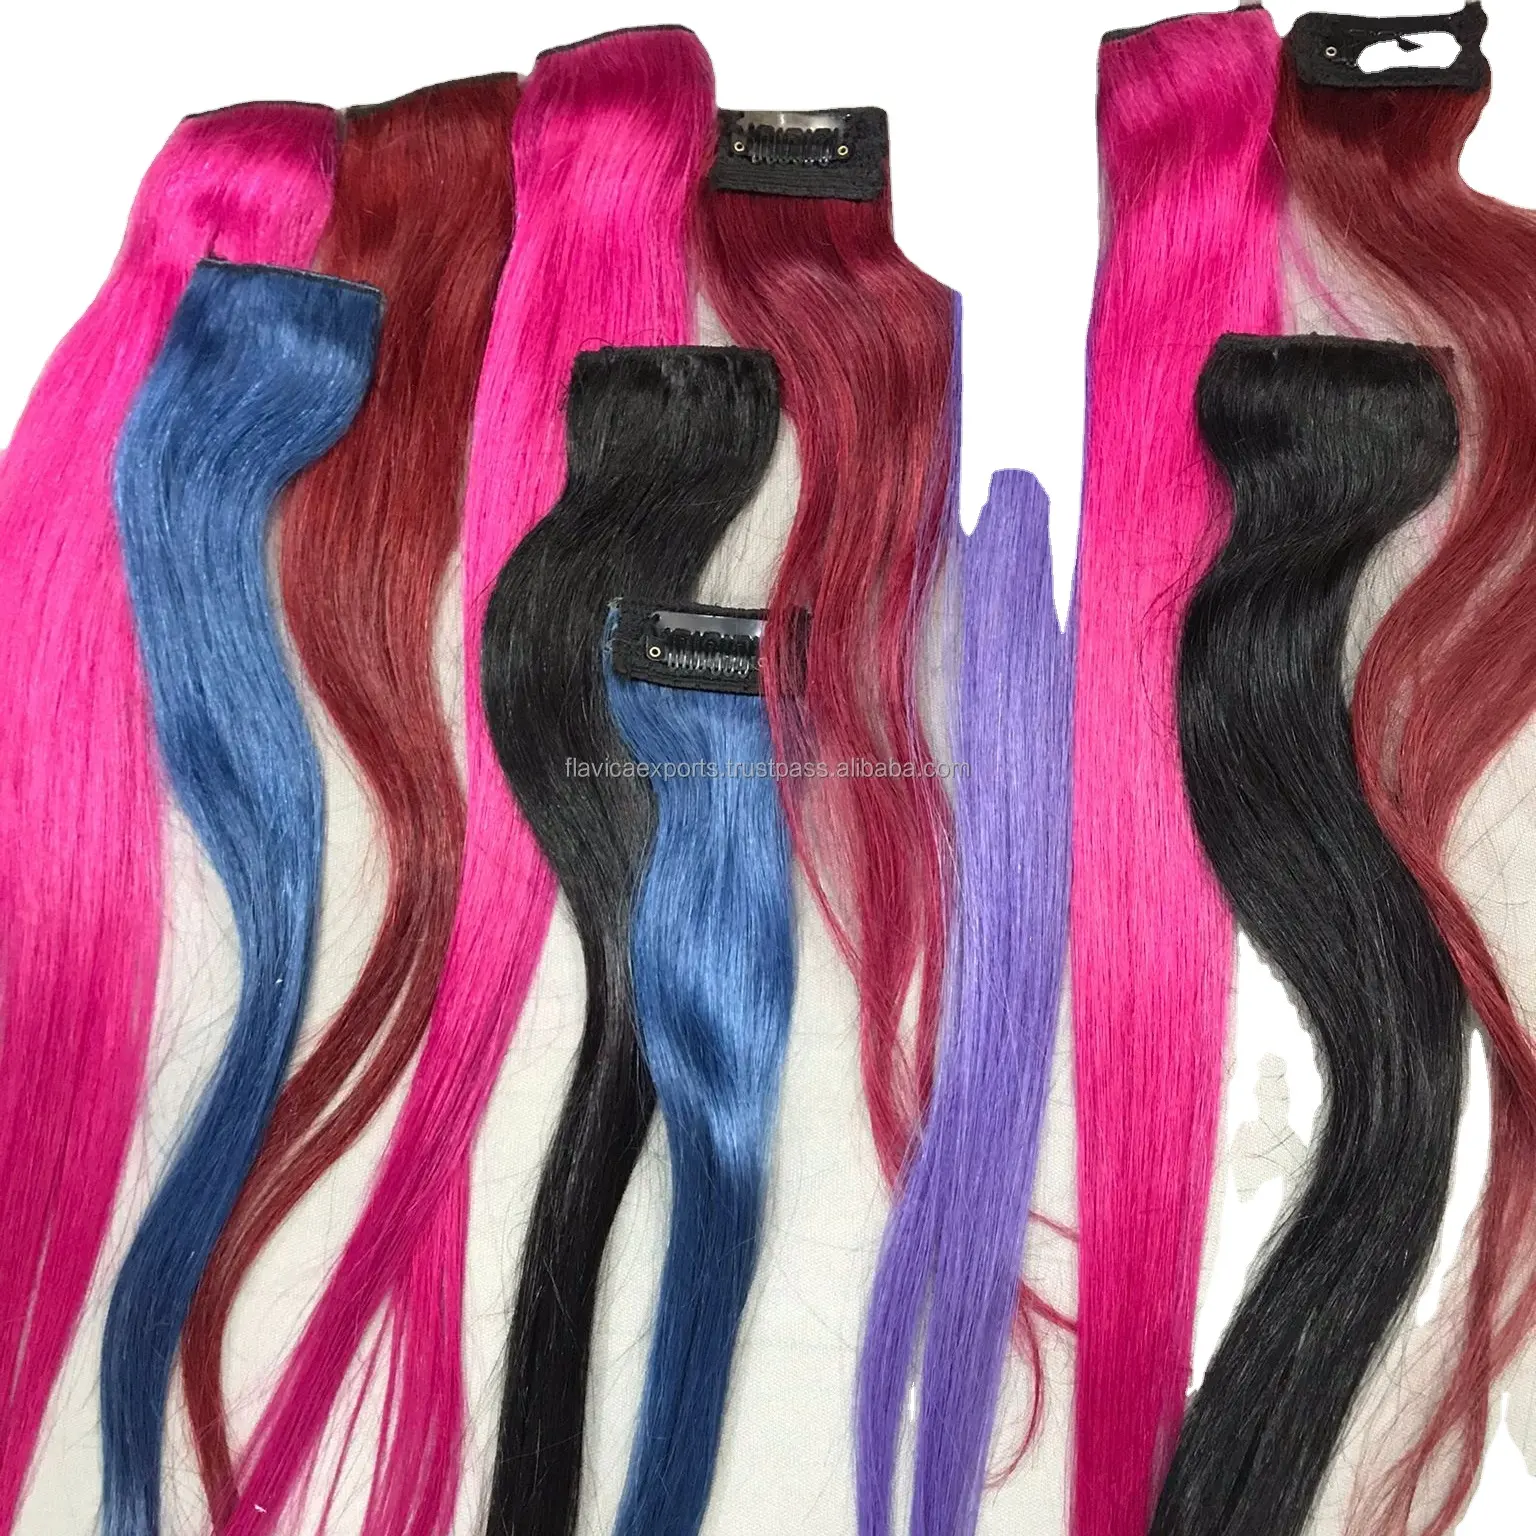 Buy Colored Grade 10A Indian Virgin Hair Extension with Customized Clip in Streaks Human Hair available in Multi Color Wholesale